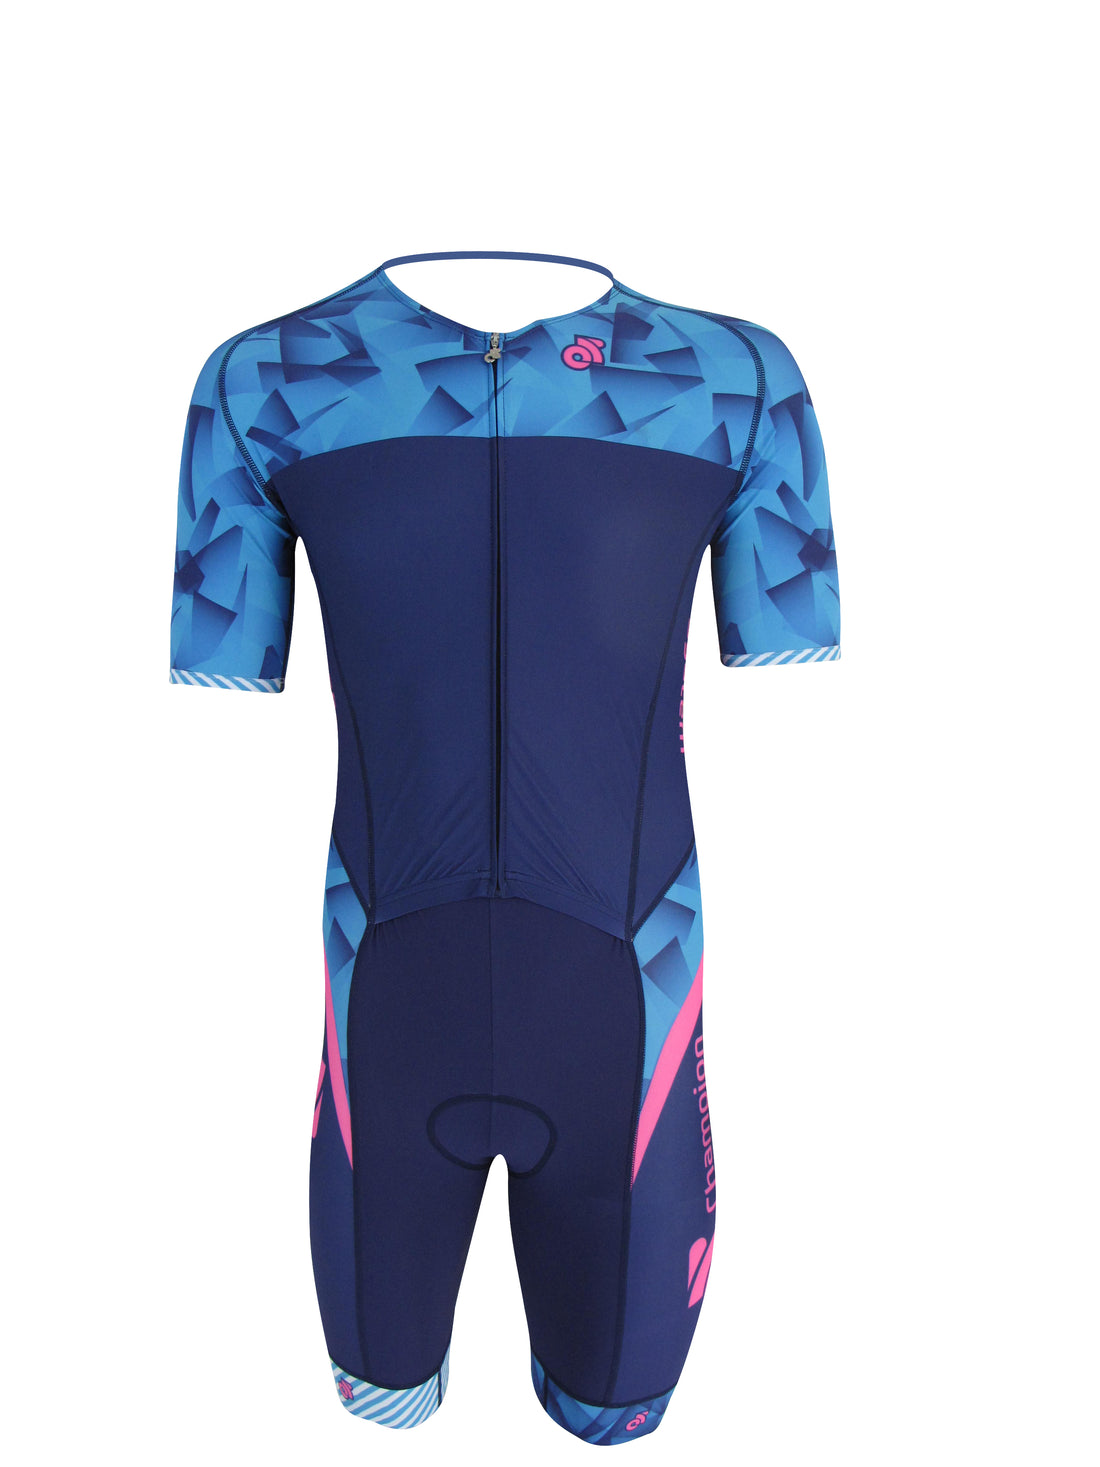 Champion System Performance Aero Tri Suit Front View